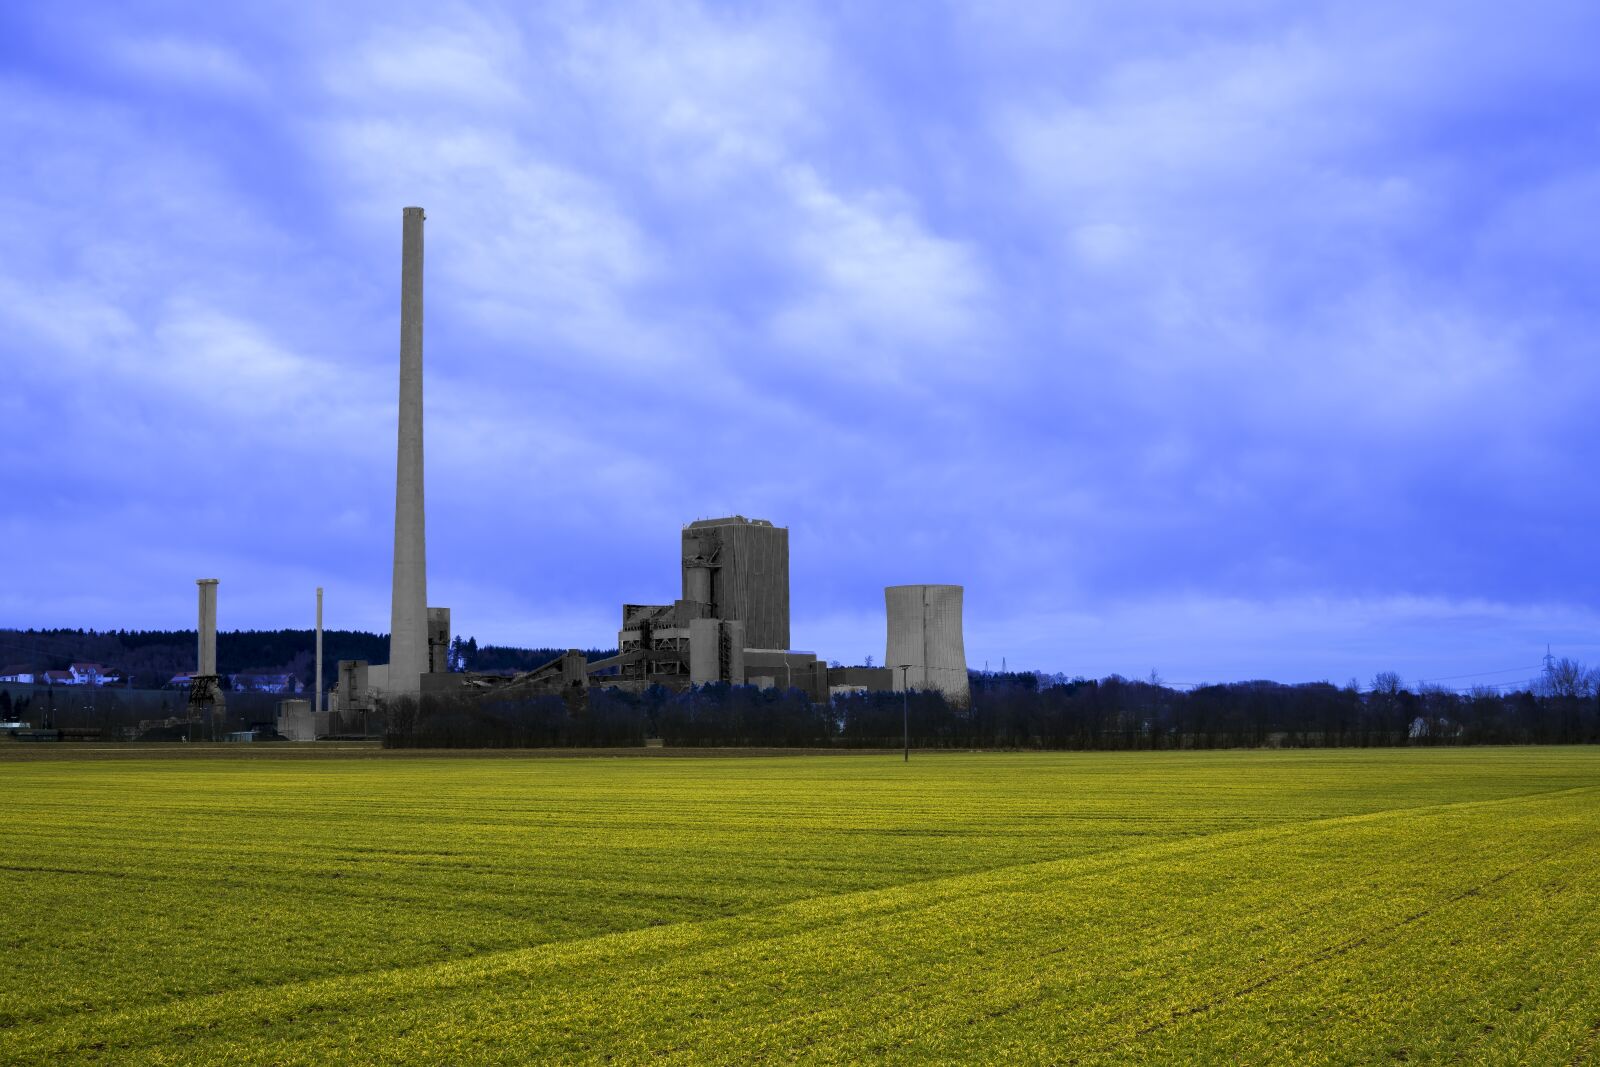 Sony a6300 sample photo. Power plant, coal fired photography